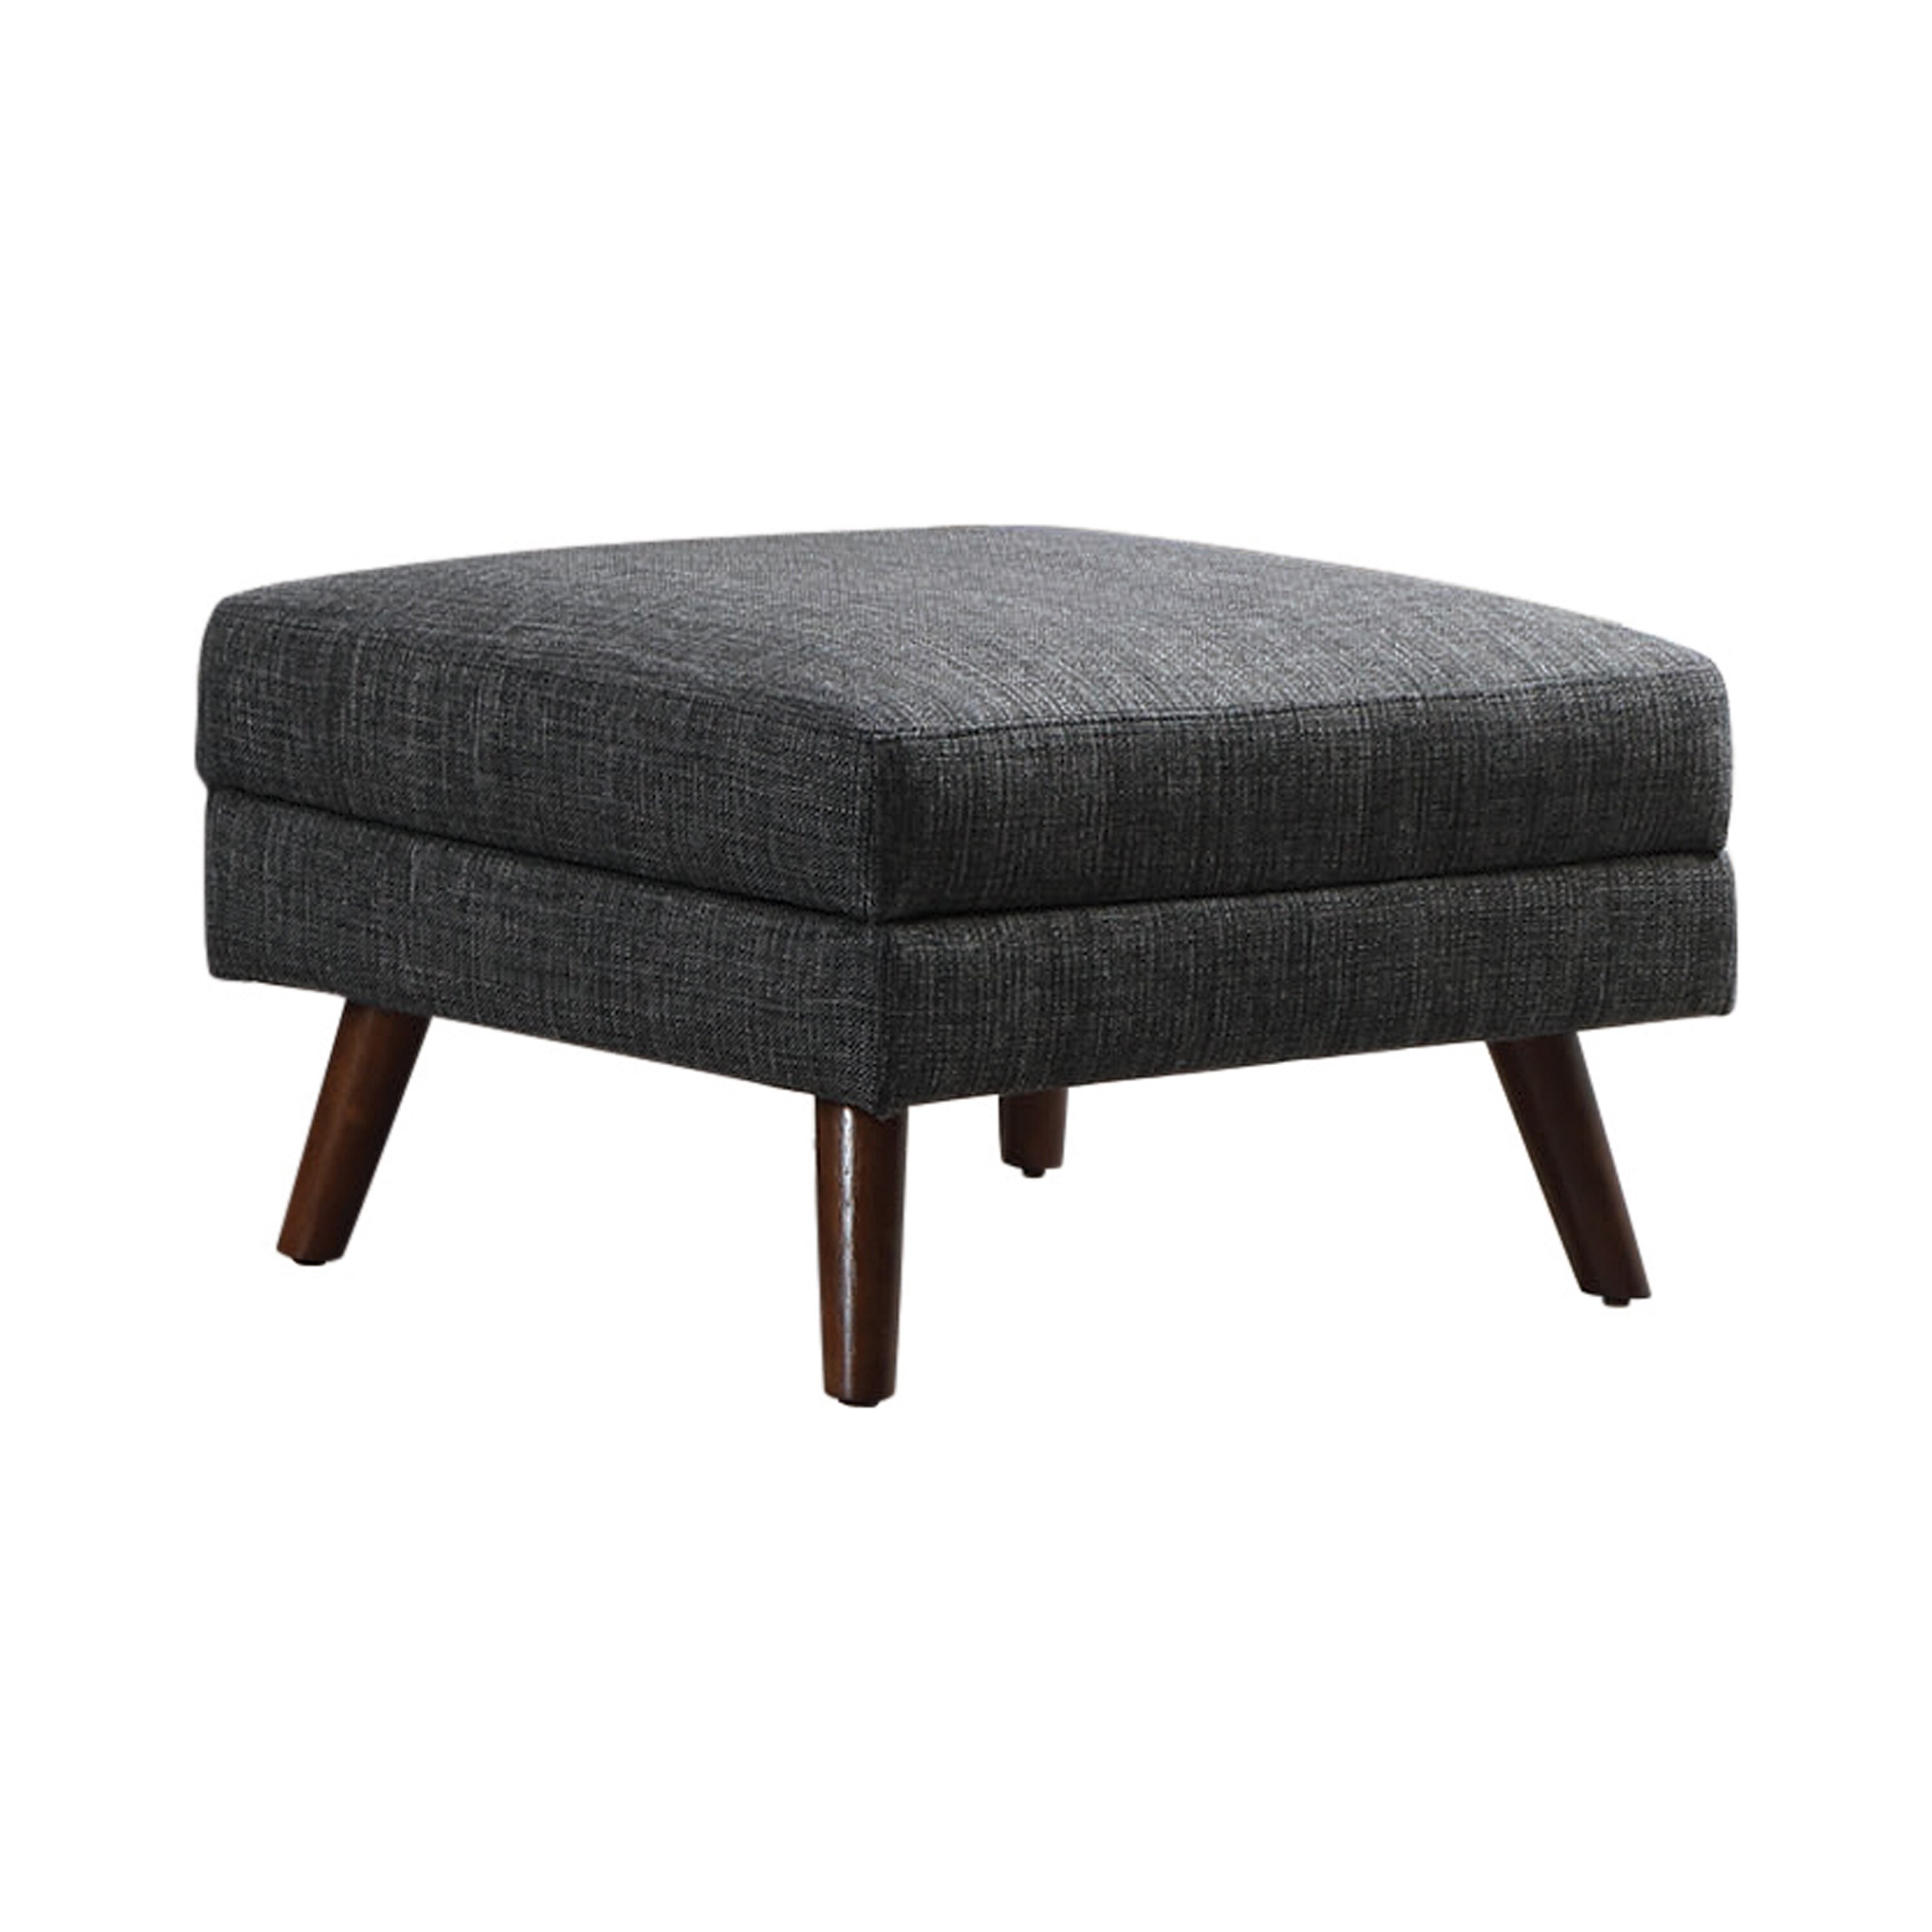 Fabric Upholstered Rectangular Ottoman with Round Angled Legs, Gray